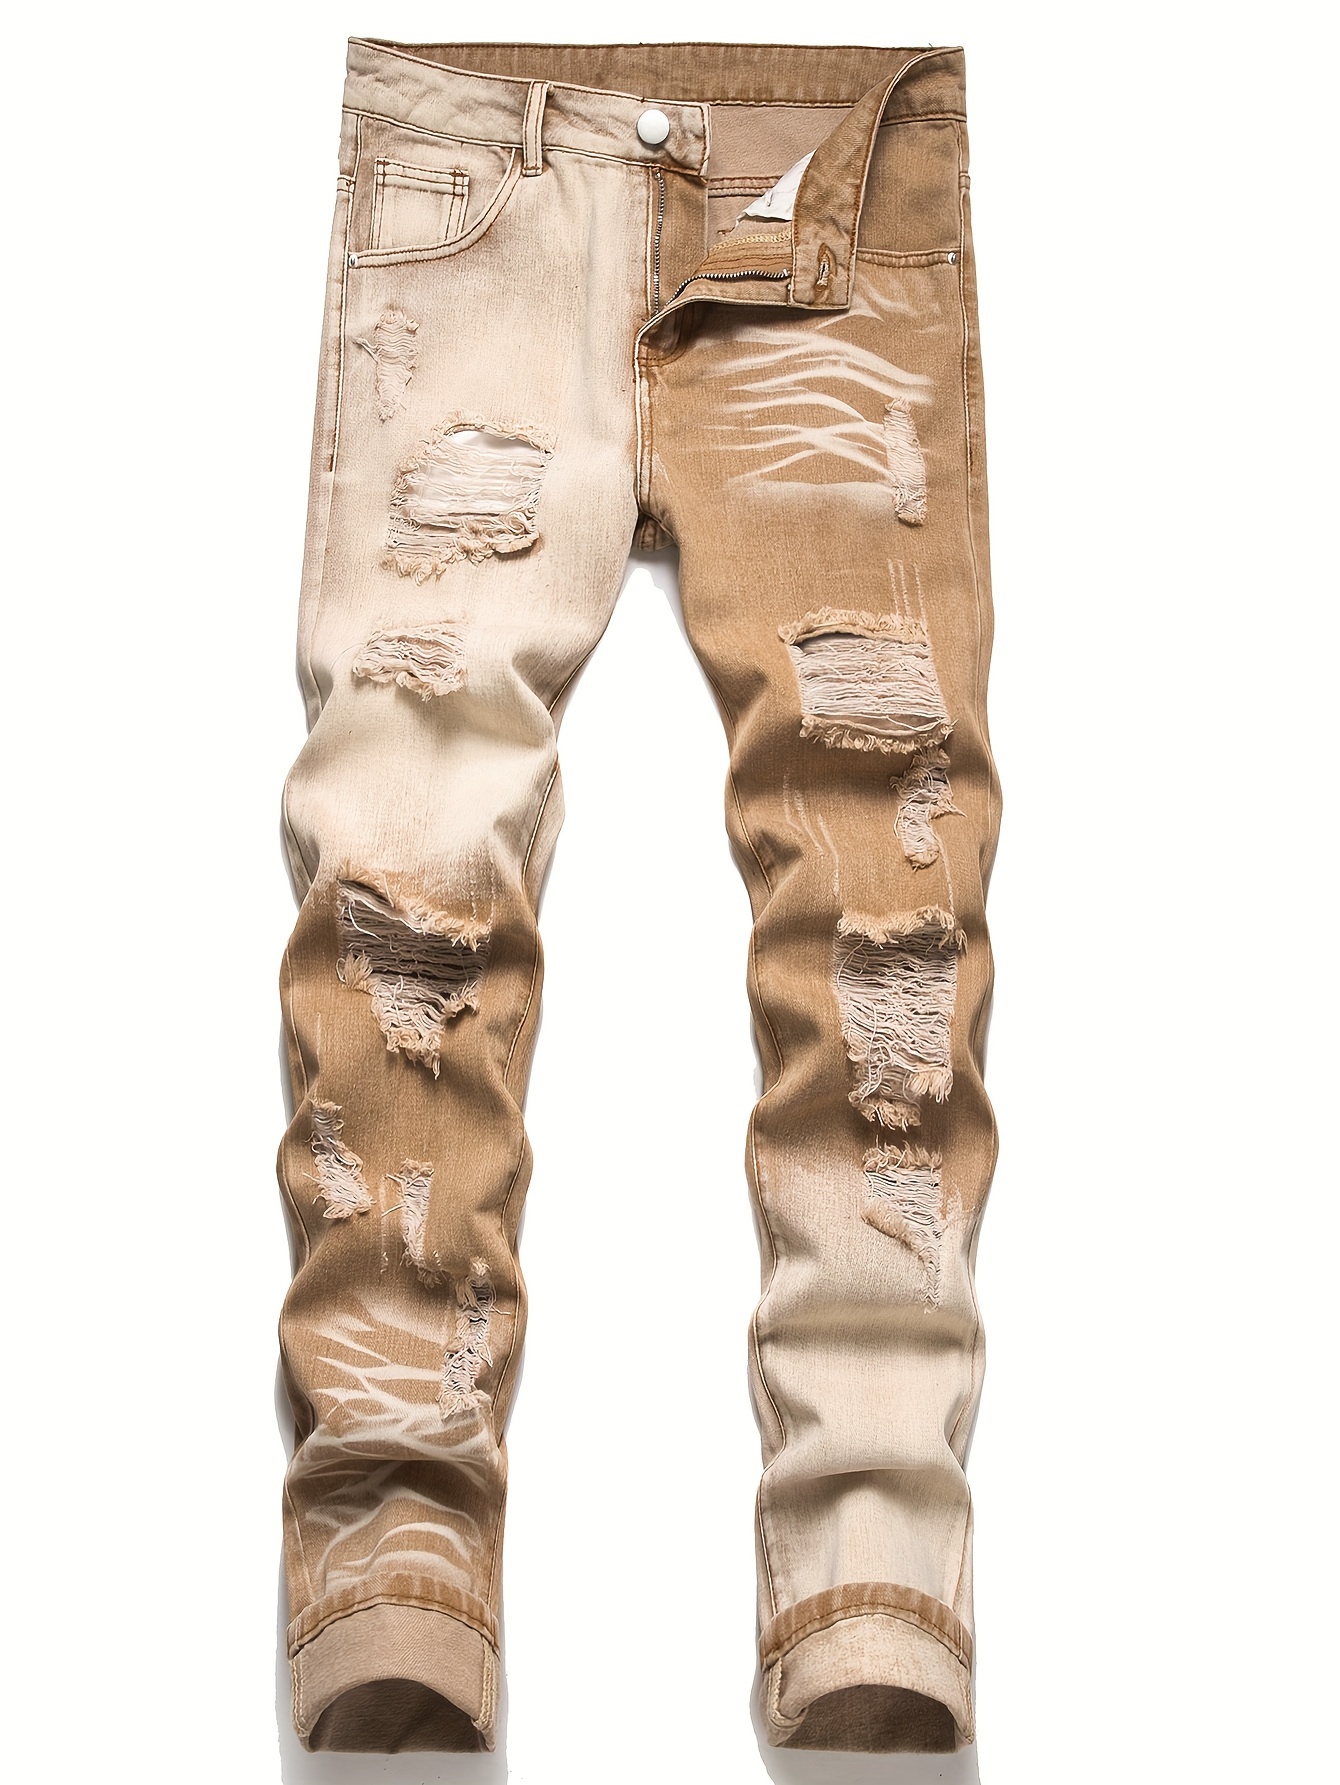 Utility Cargo Jeans Men - Ripped Distressed Jeans